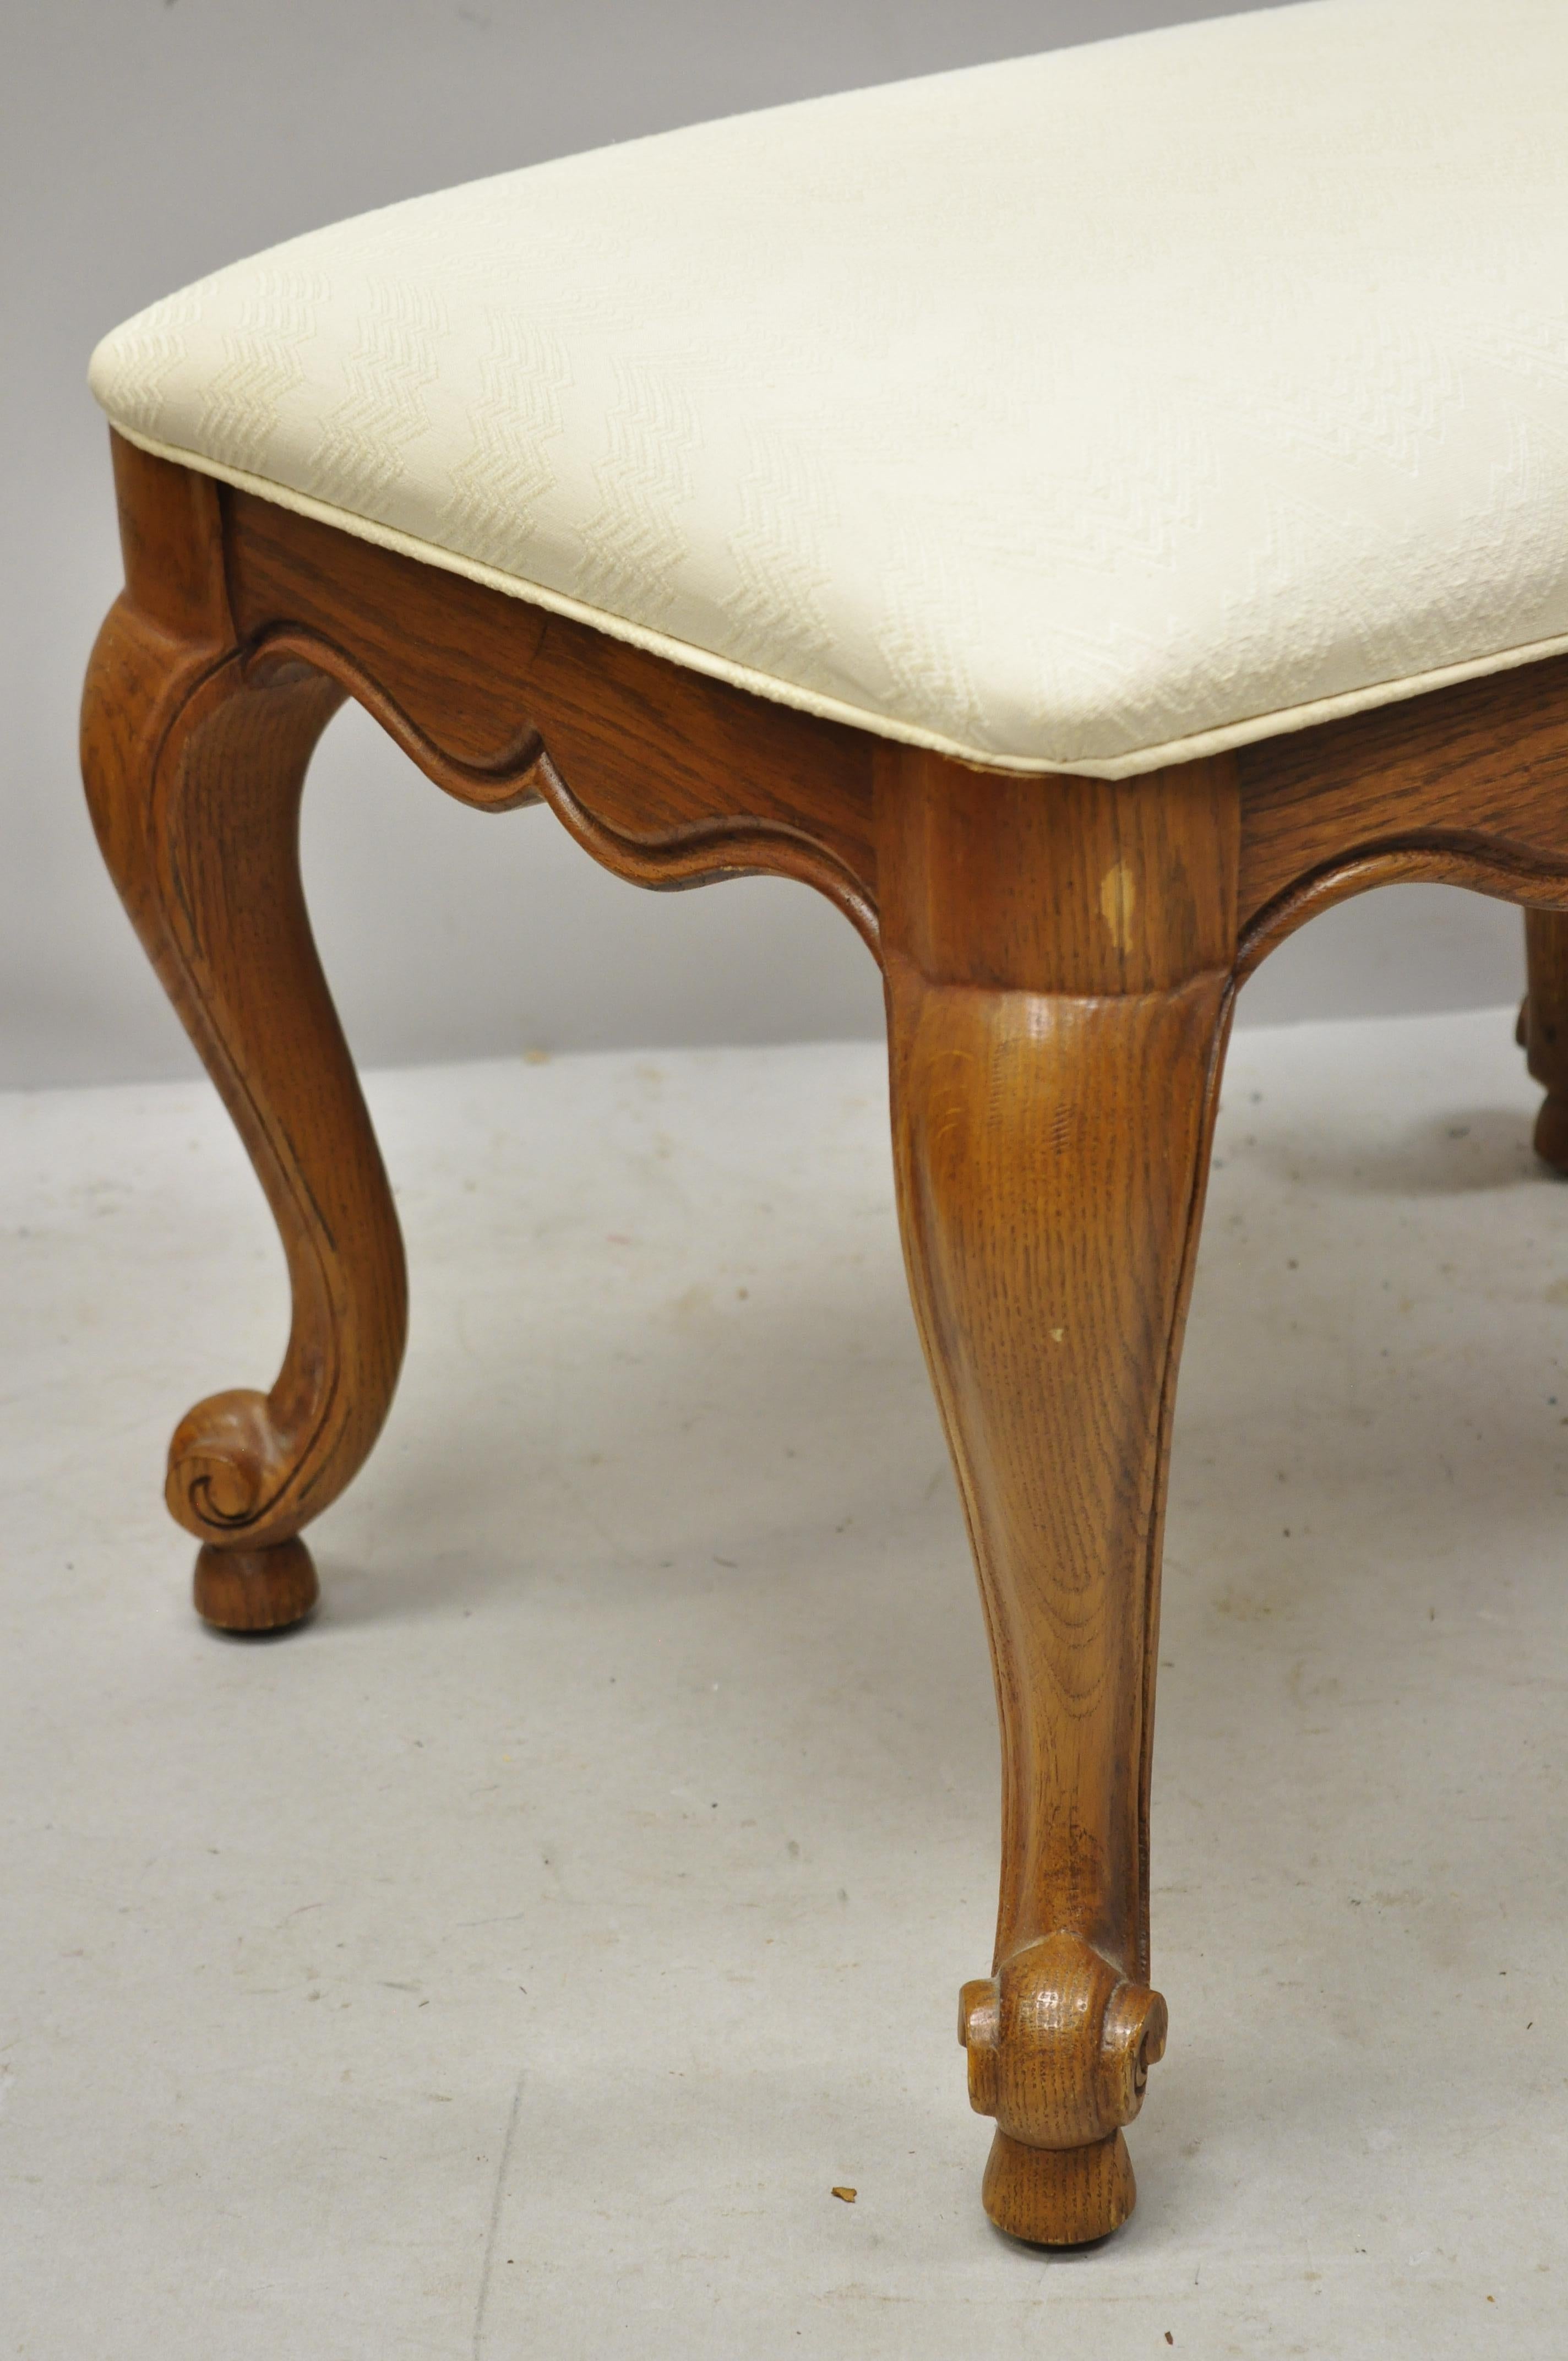 20th Century Vintage Drexel French Provincial Oakwood Cabriole Leg Stool Bench, a Pair